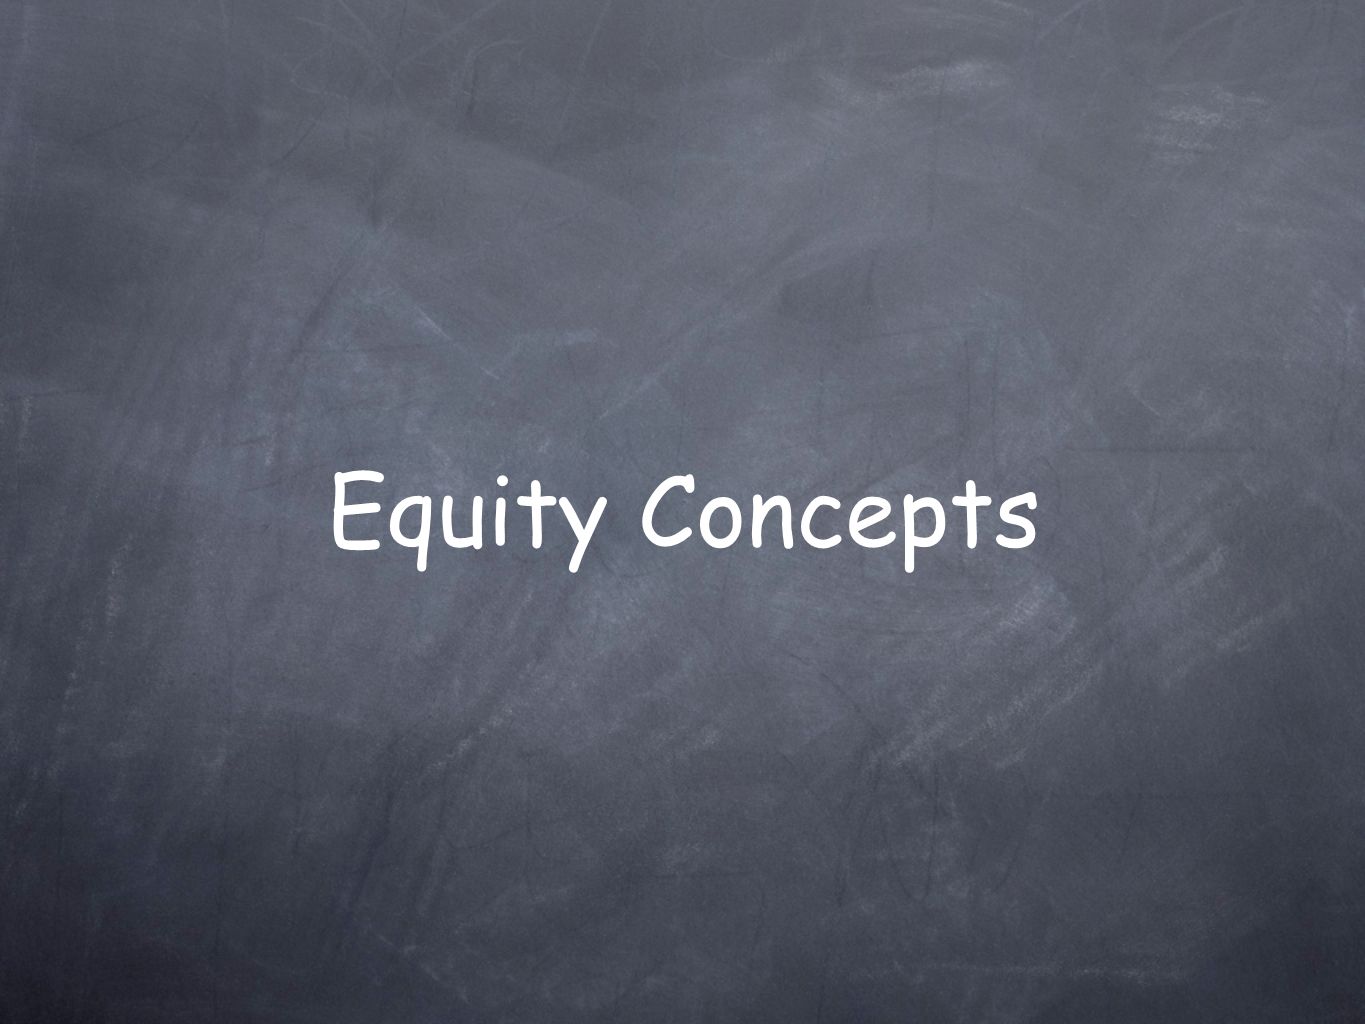 Equity Concepts